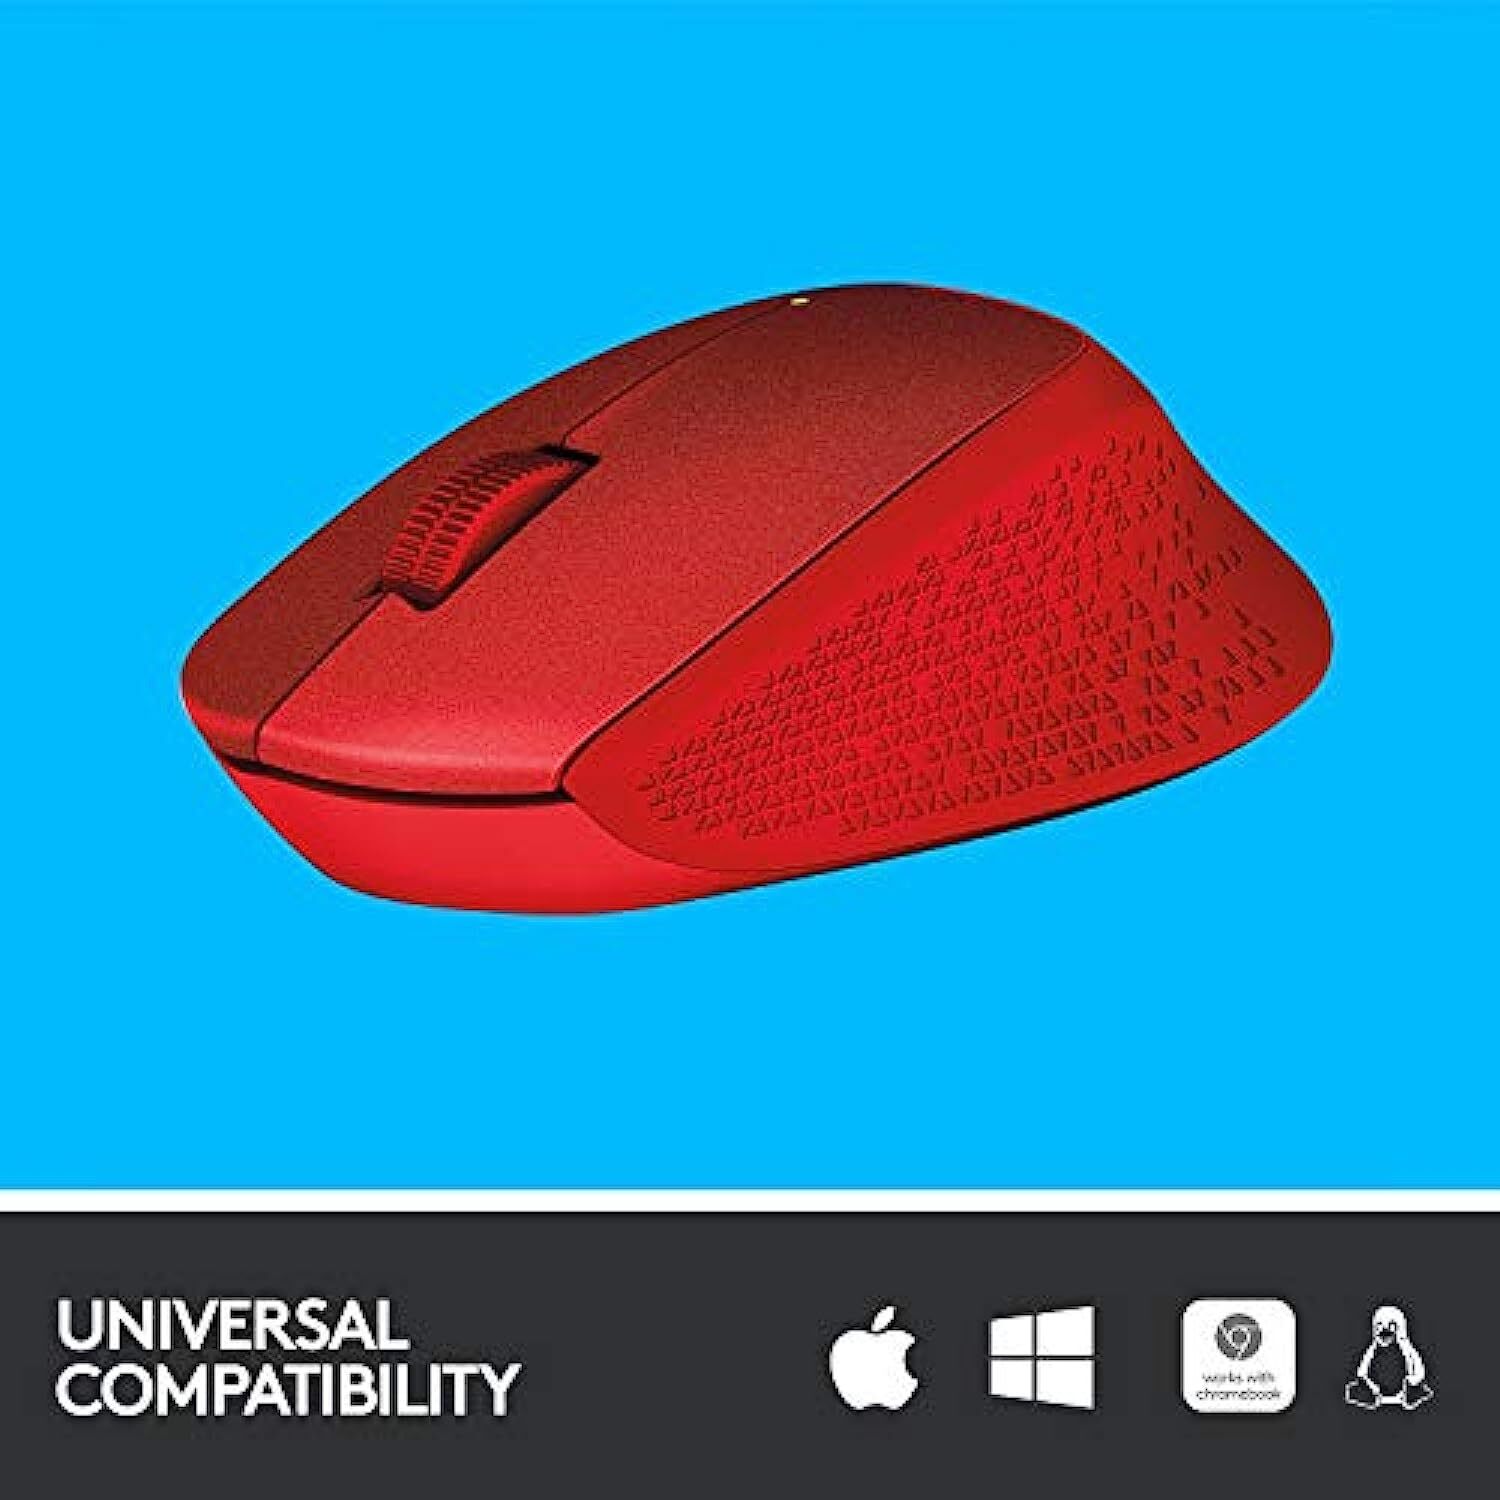 Logitech M331 Silent Plus Wireless Mouse, 2.4GHz with USB Nano Receiver, 1000 DPI Optical Tracking, 3 Buttons, 24 Month Life Battery, PC/Mac/Laptop - Red